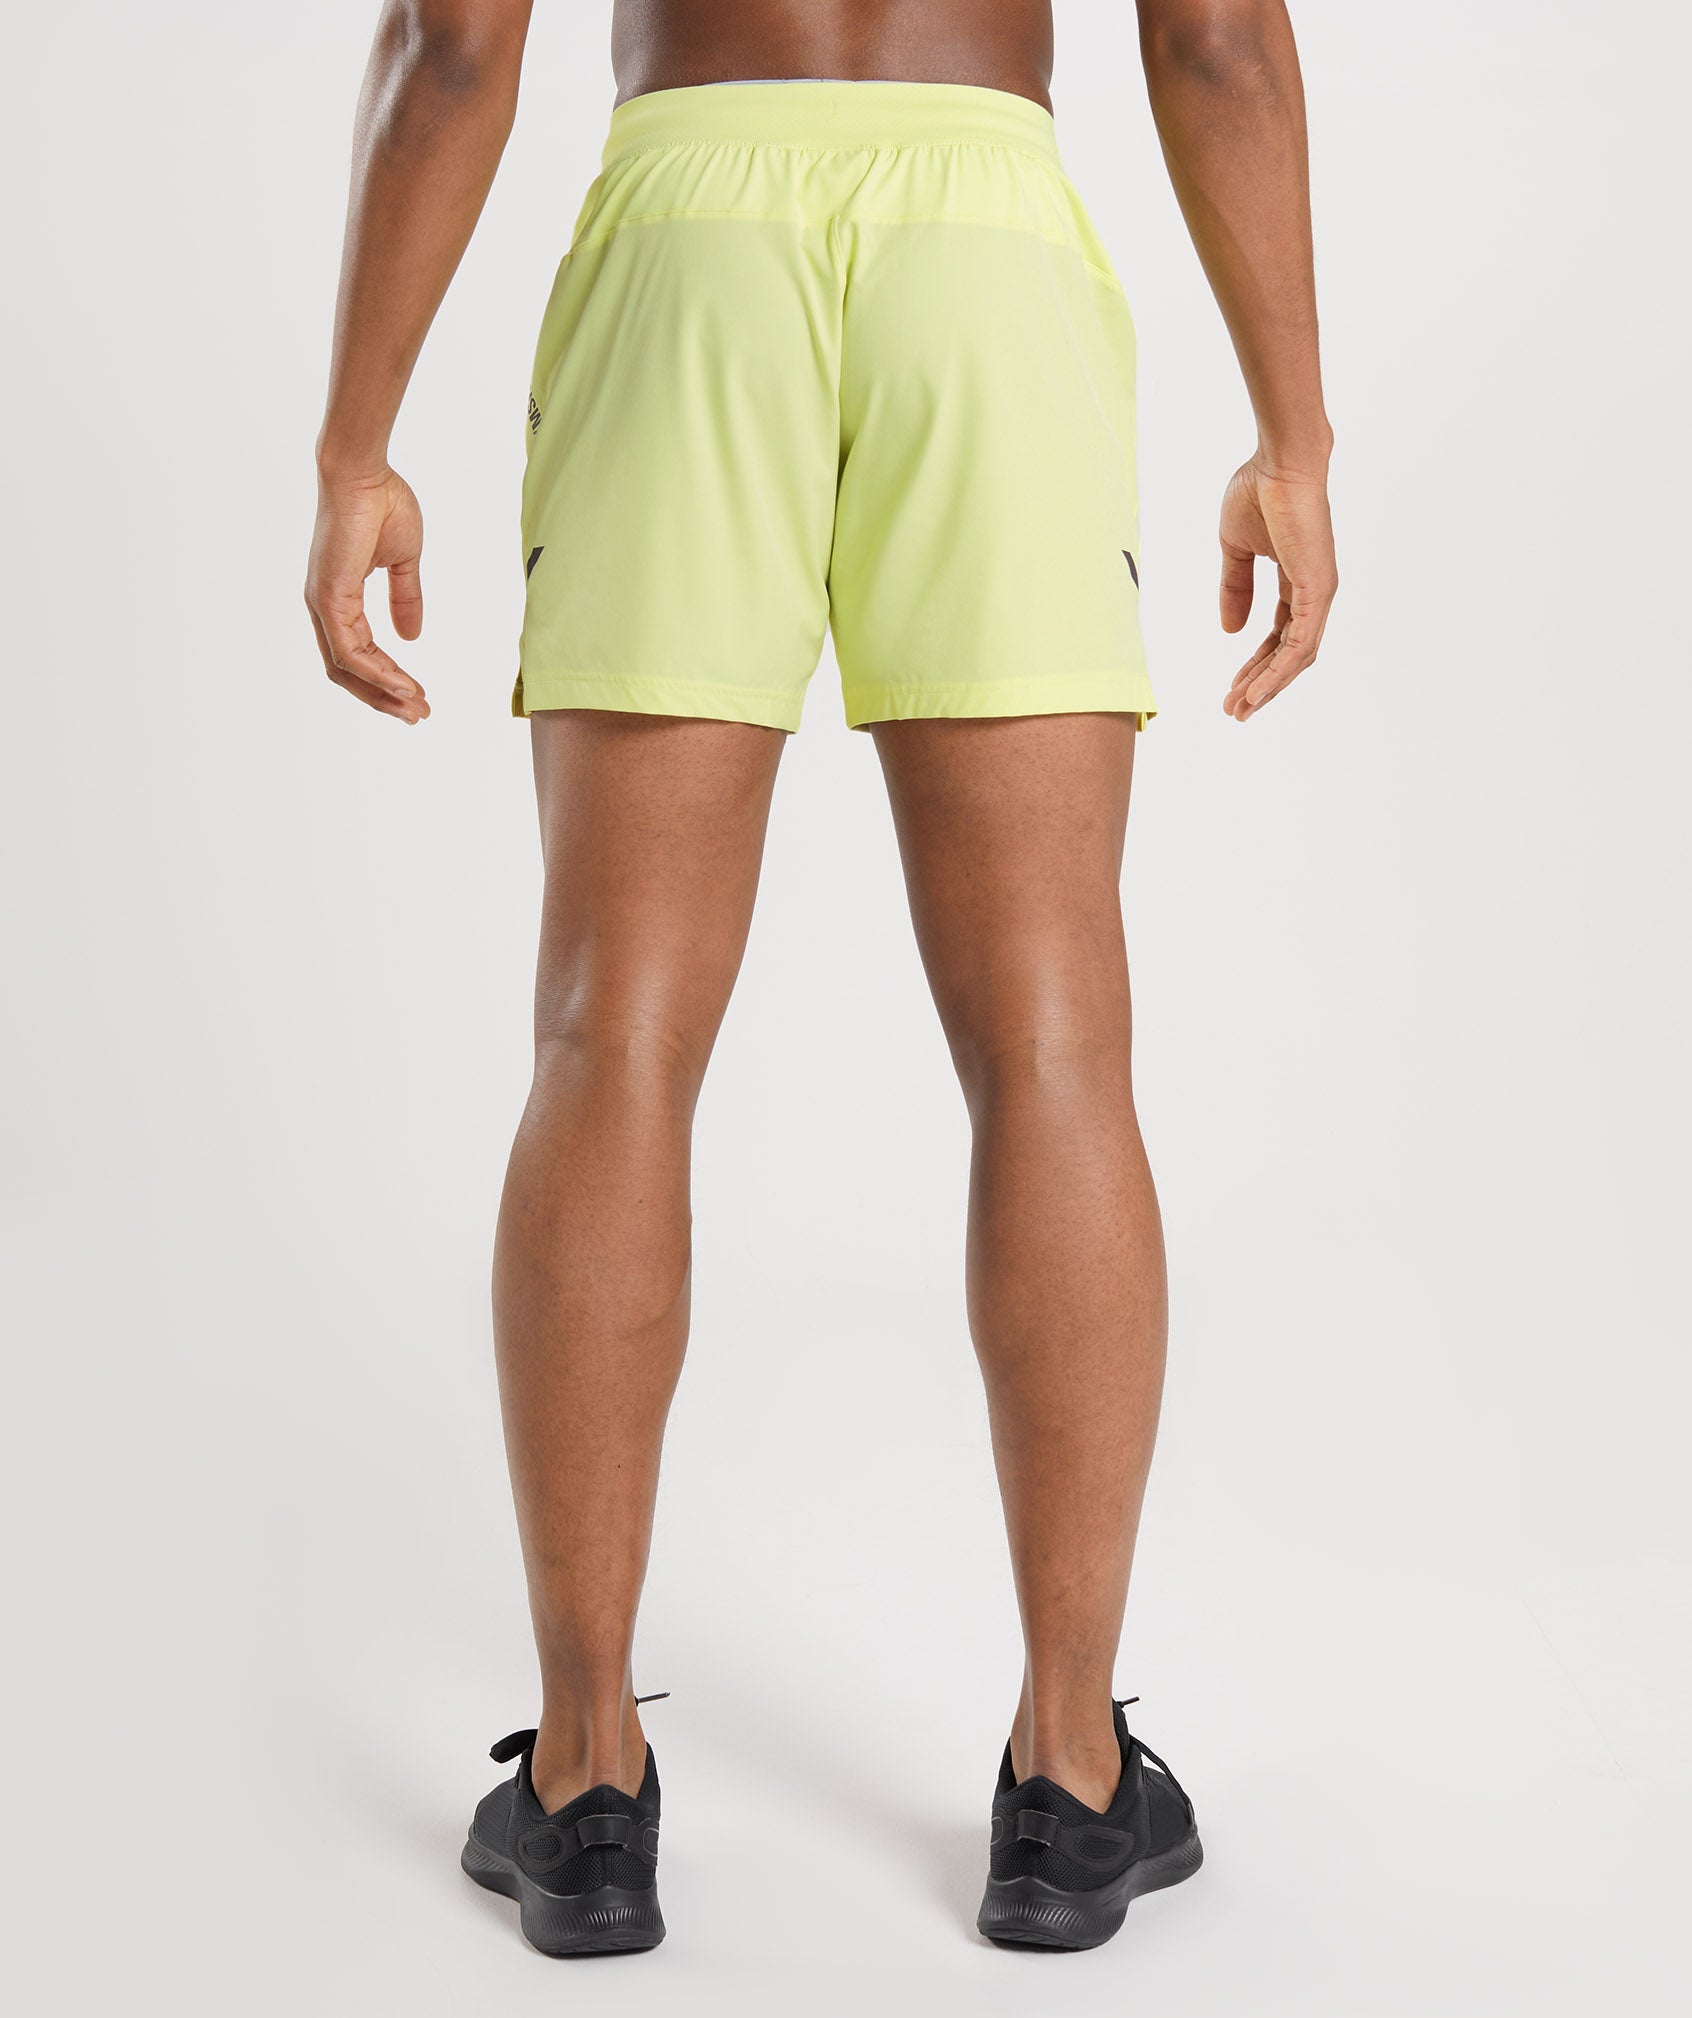 Apex 5" Perform Shorts in Firefly Green - view 2